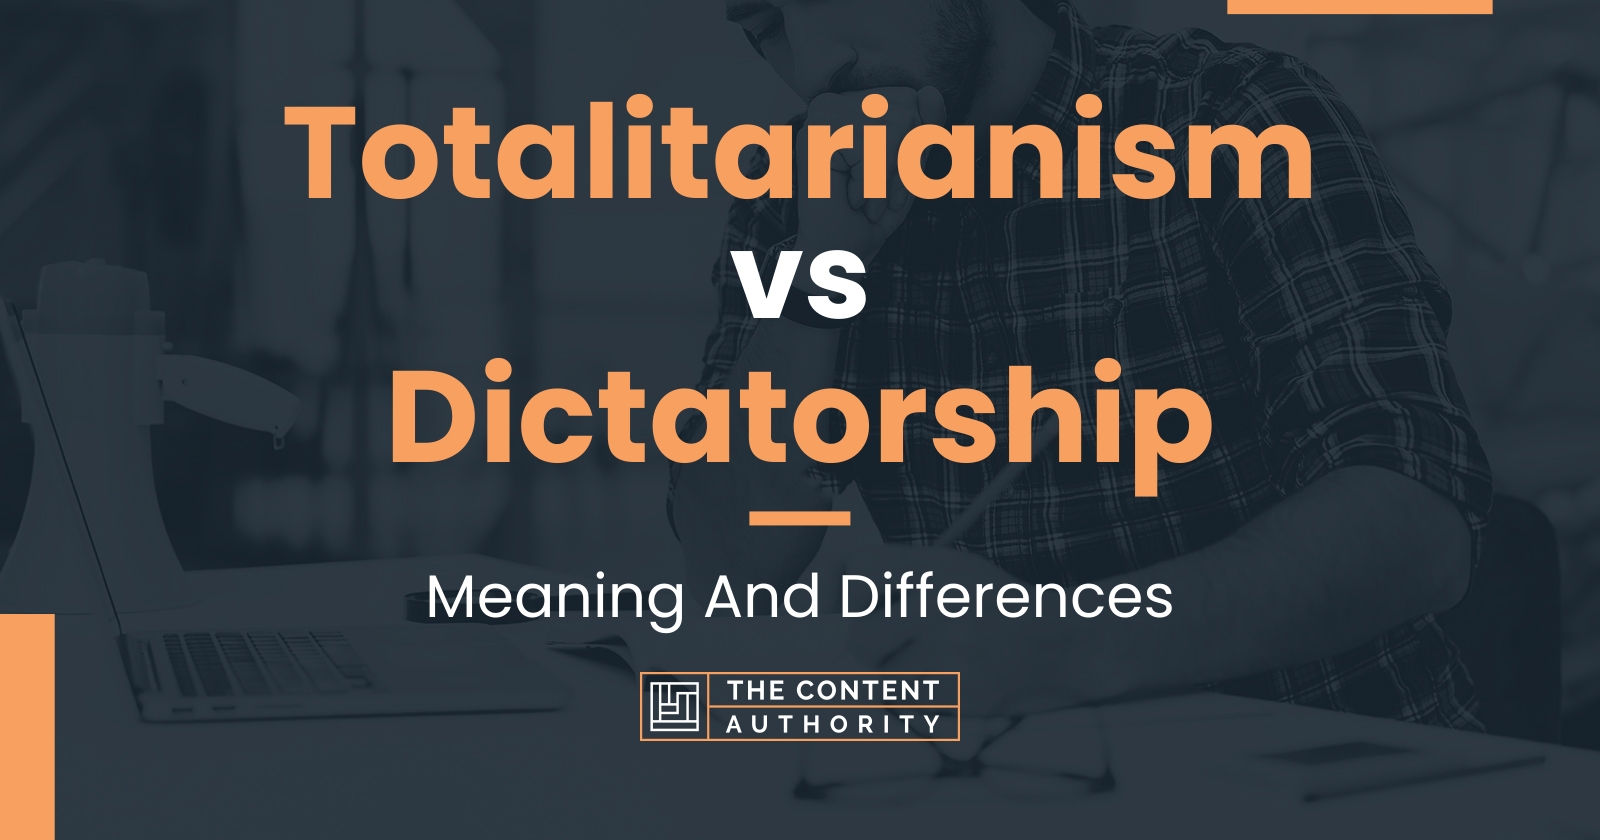 Totalitarianism vs Dictatorship: Meaning And Differences